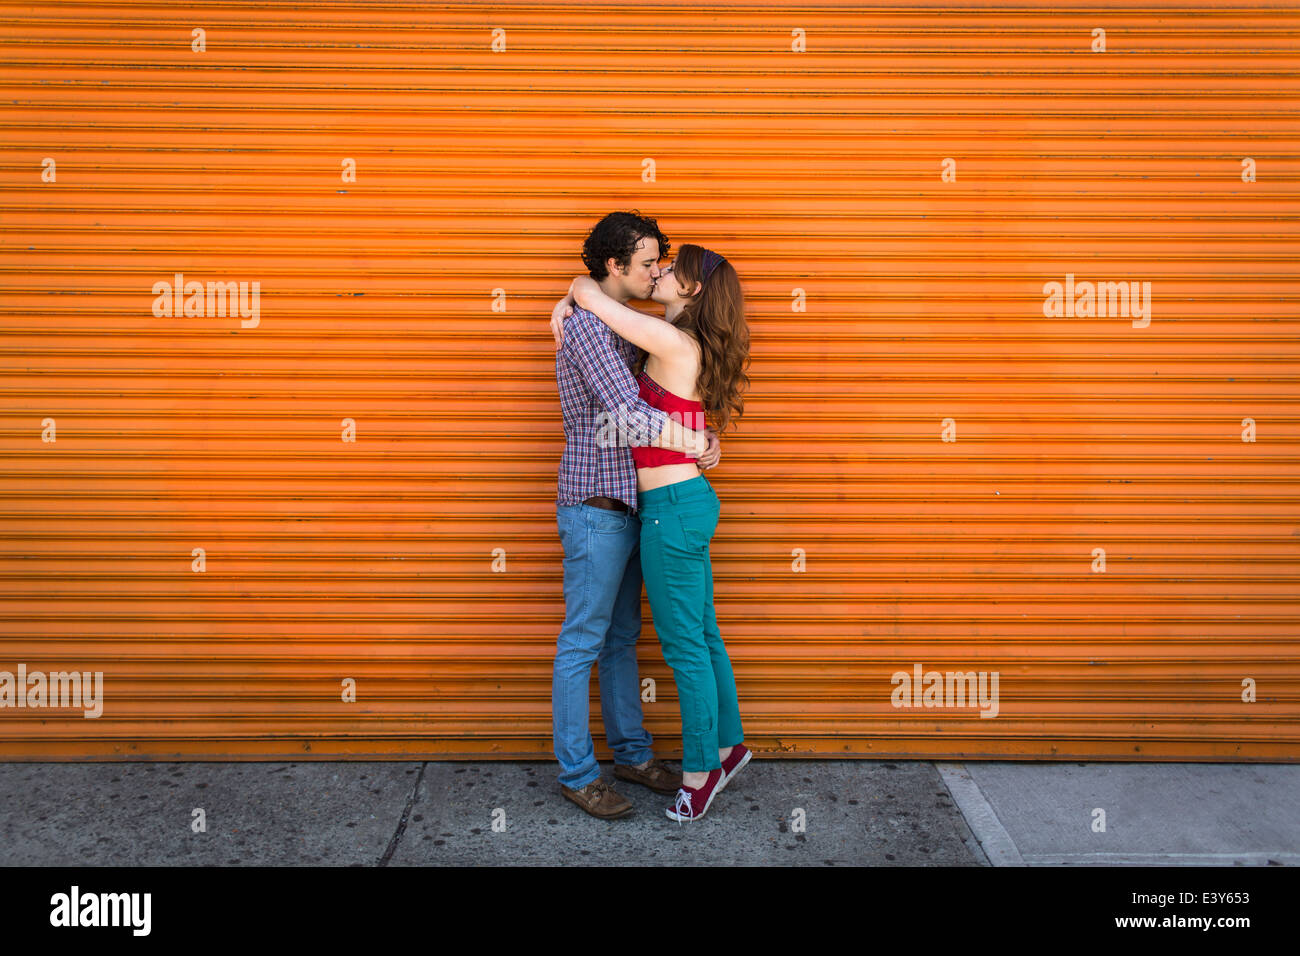 Romantic couple kissing in front of orange shutter Stock Photo